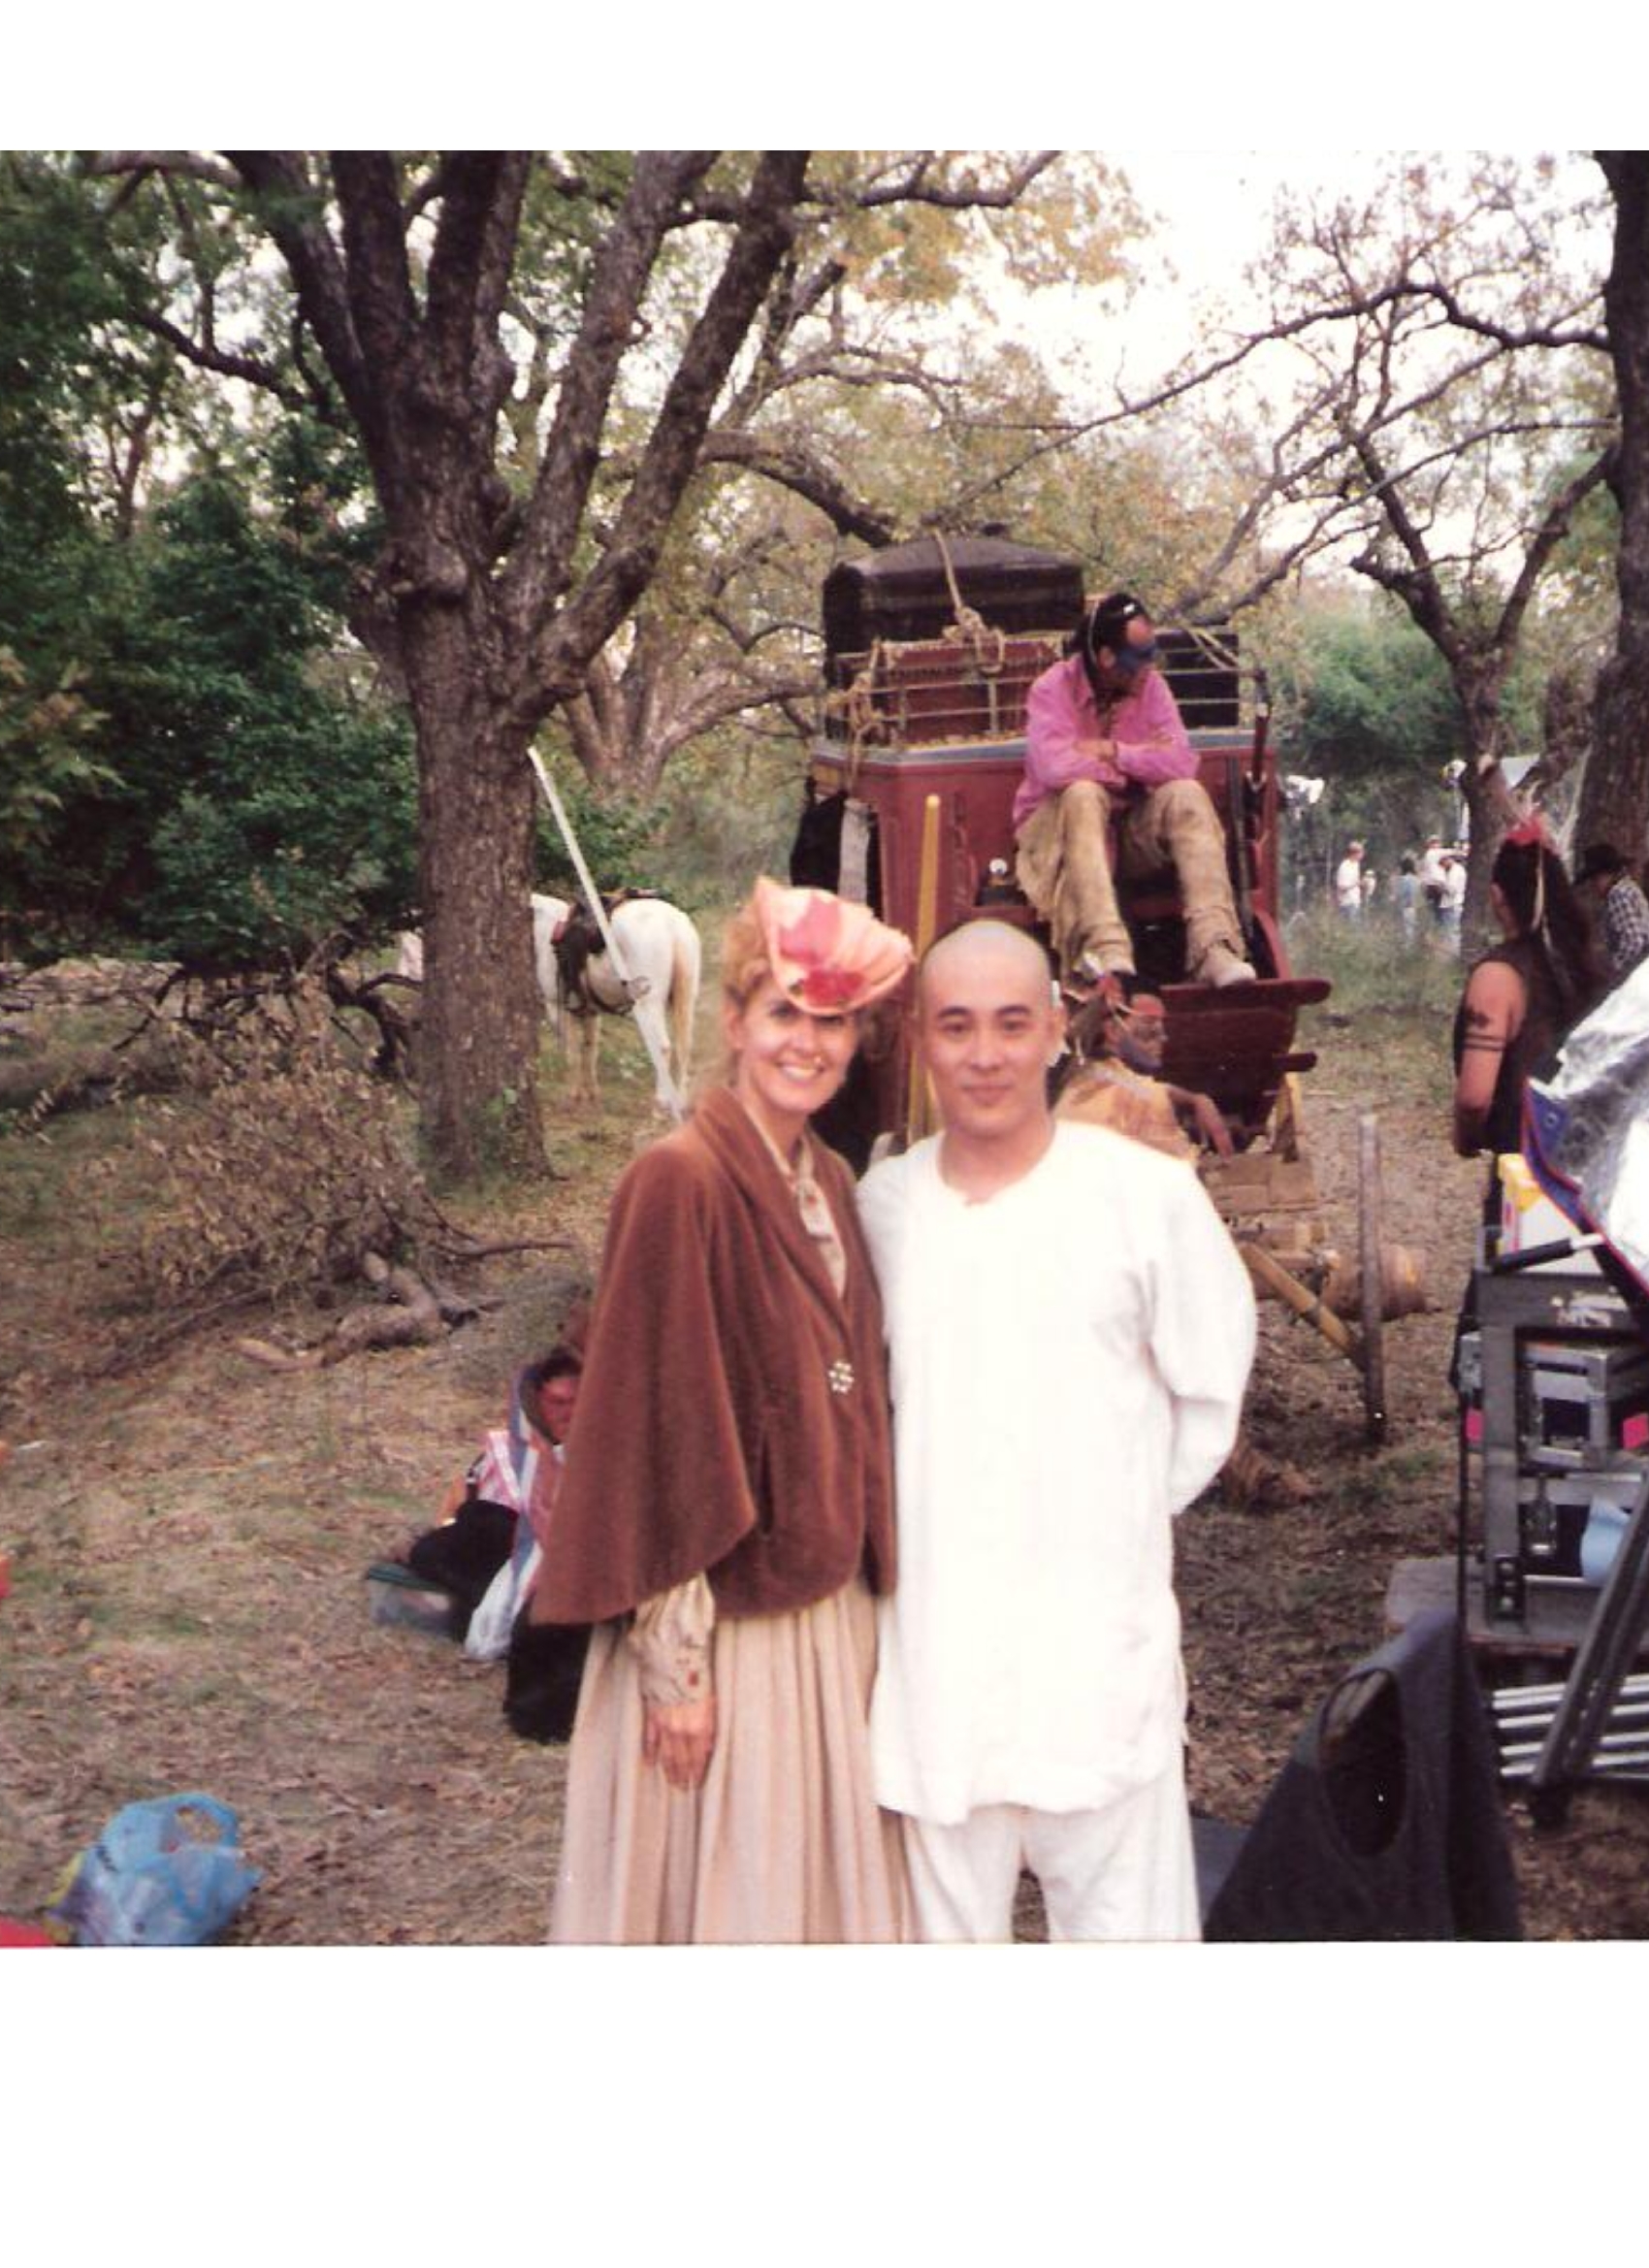 Deborah Kay and Jet Li on the set of Once Upon a Time in China and America.